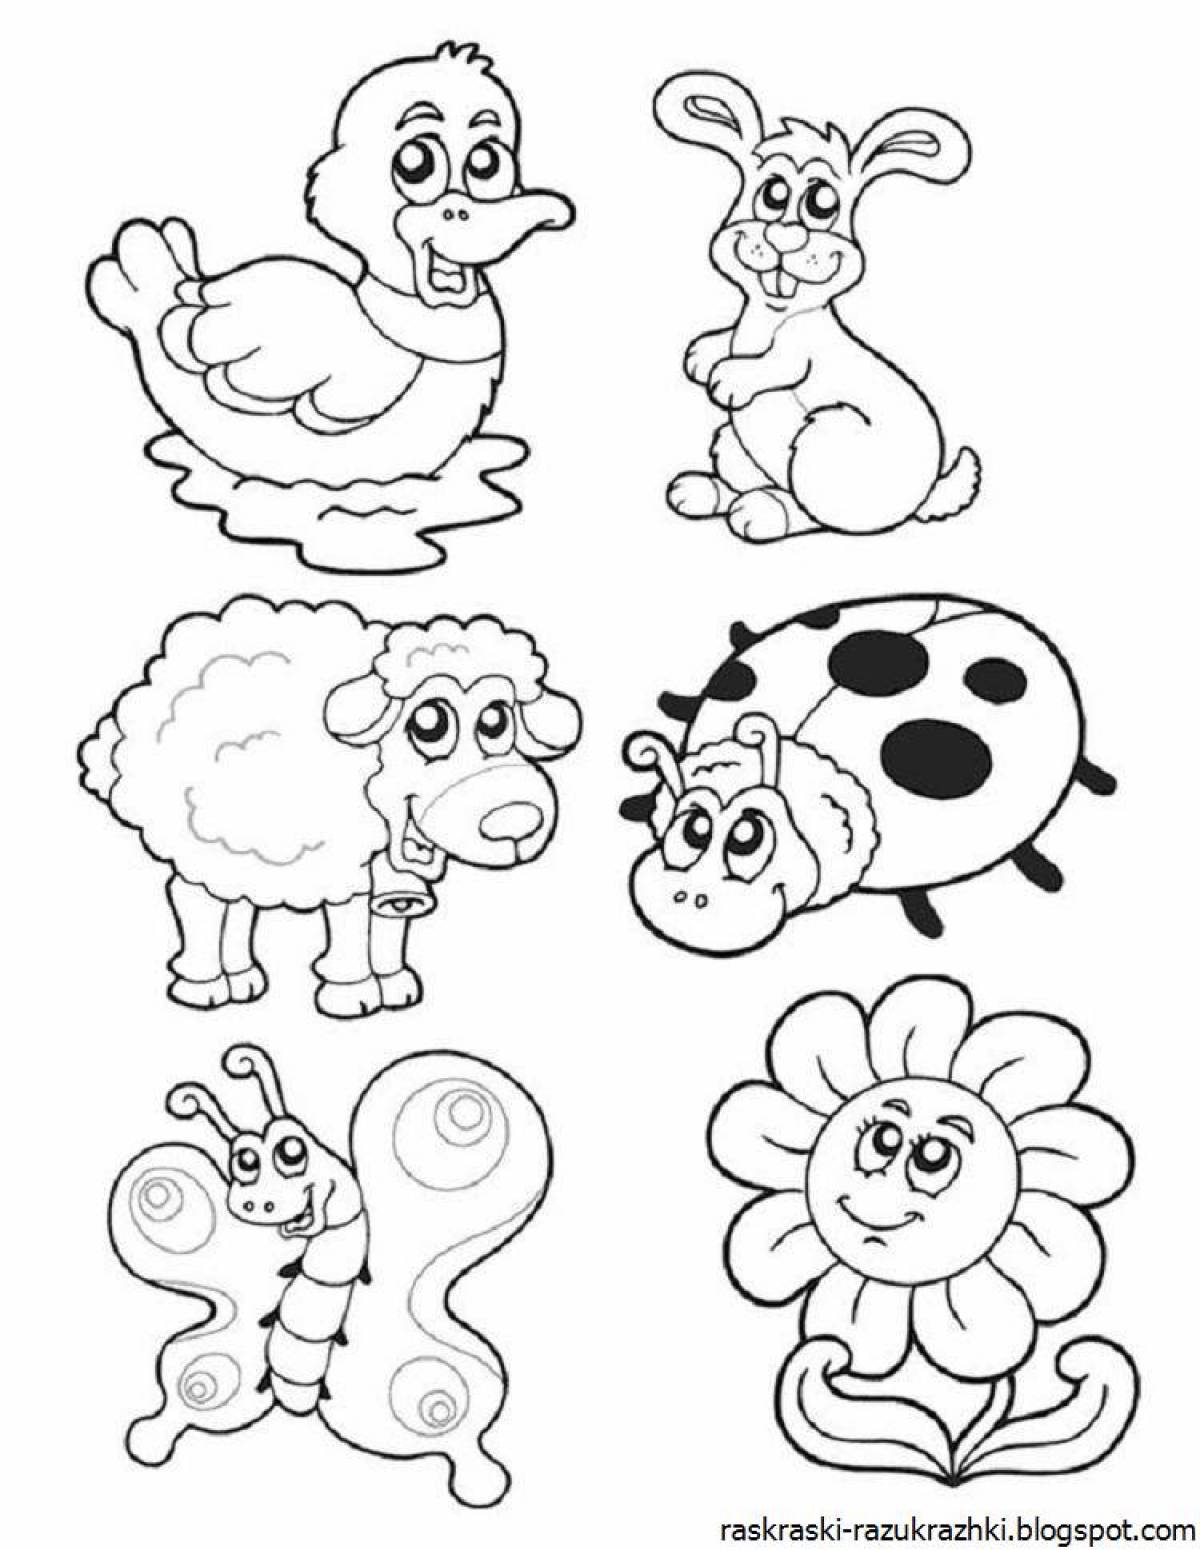 Animal coloring pages for kids 5-7 years old